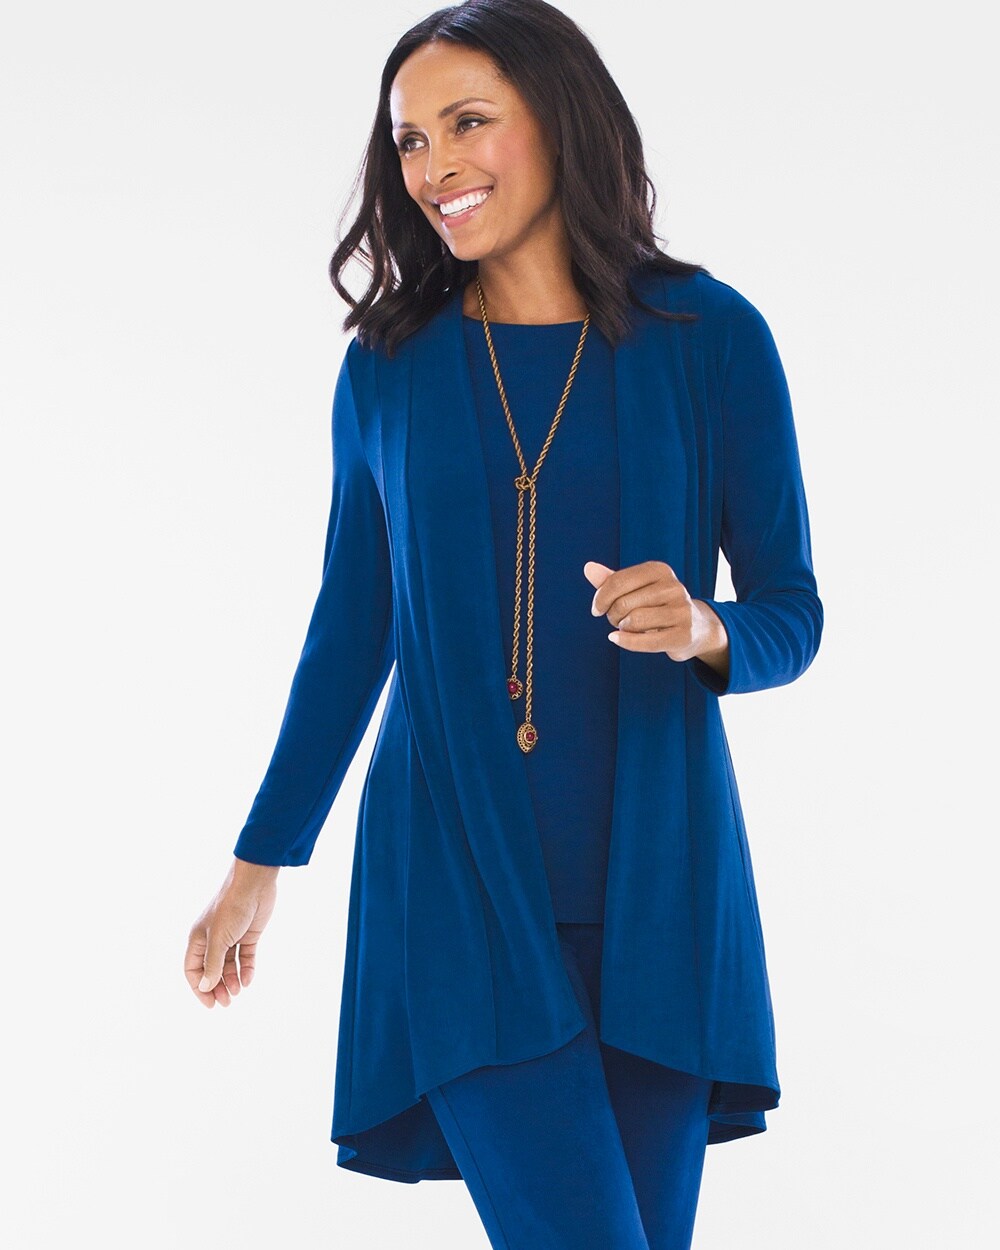 Travelers Classic Pleat-Detail Cardigan in Royal Blue